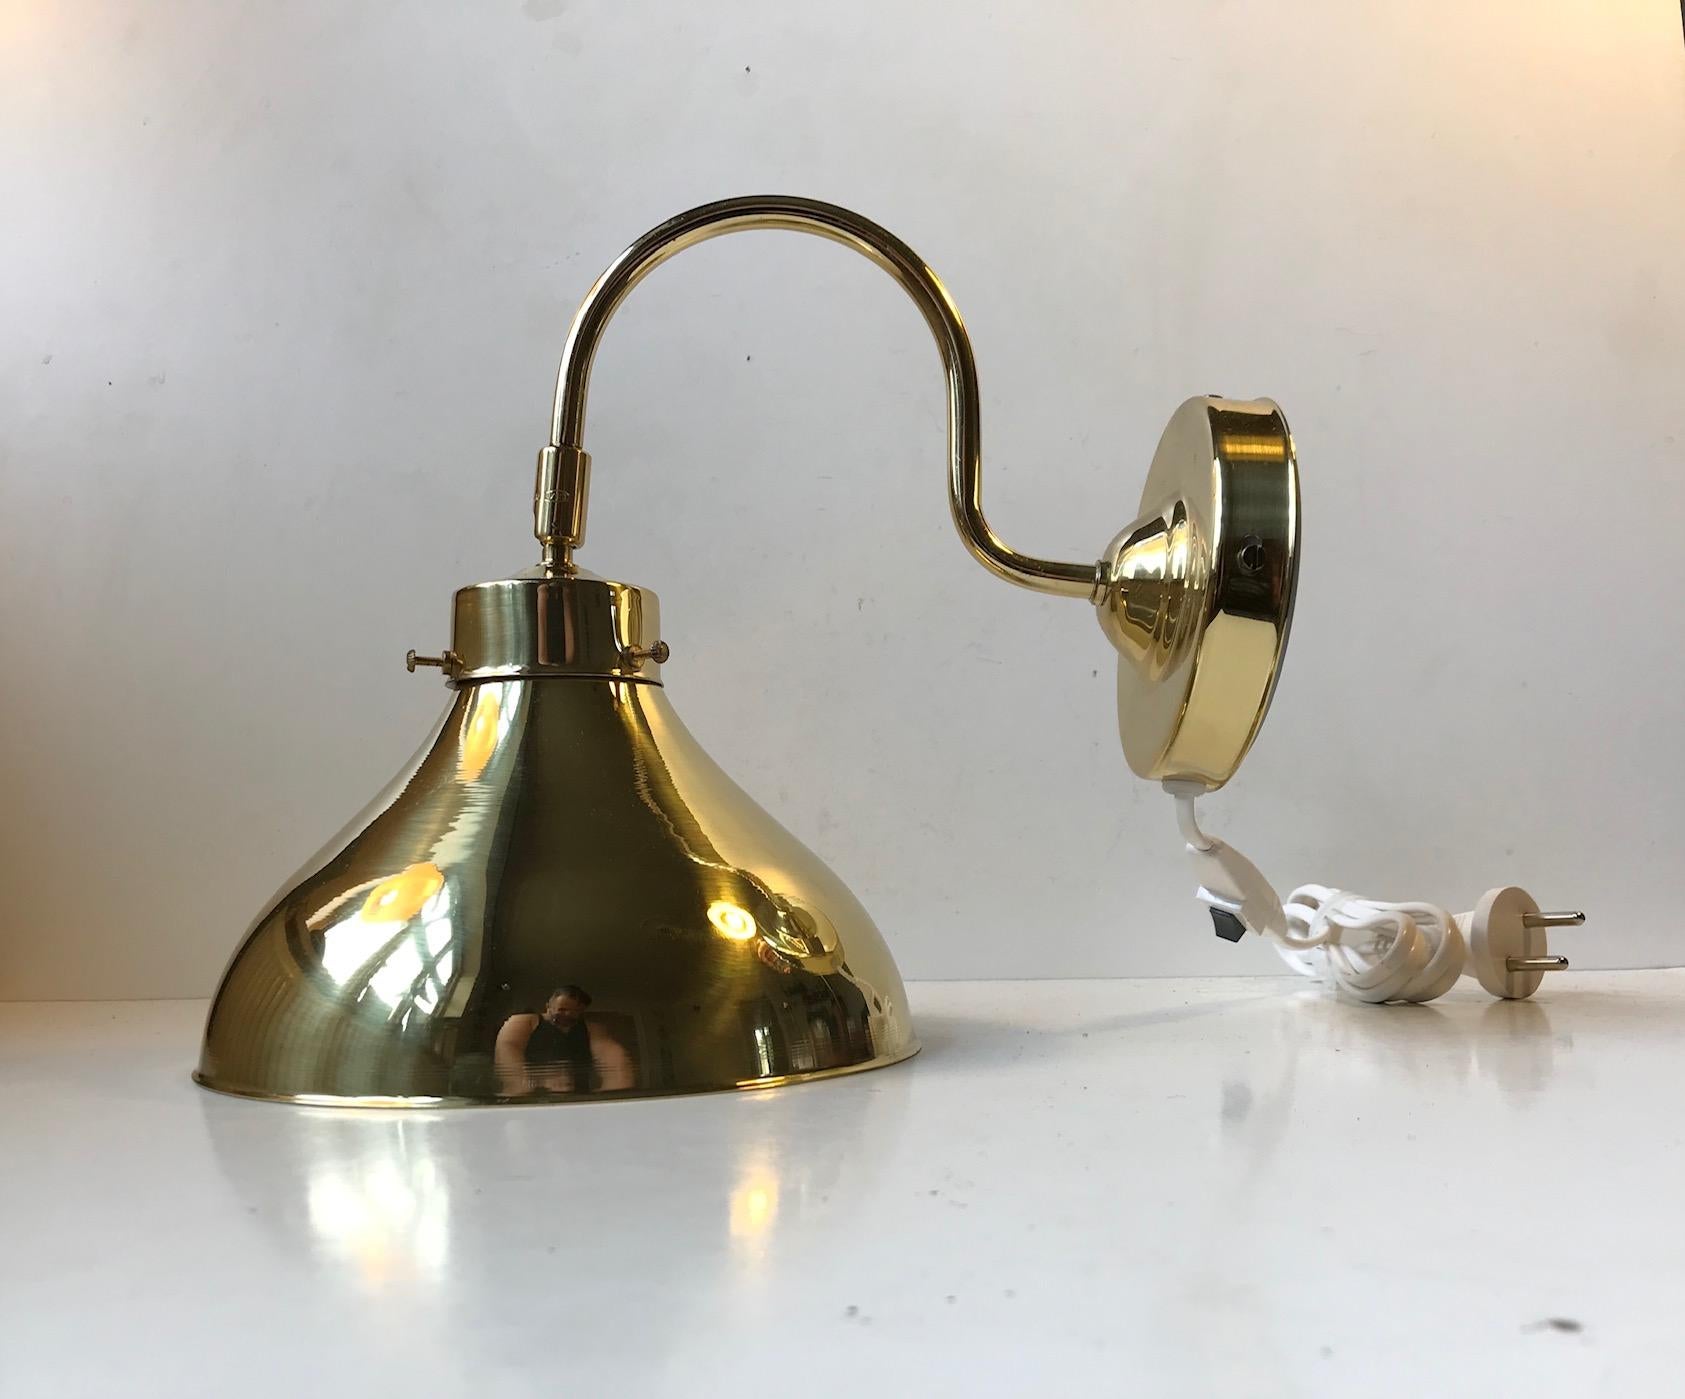 Danish Modern Adjustable Brass Wall Light by Abo Metalkunst, 1970s In Excellent Condition For Sale In Esbjerg, DK